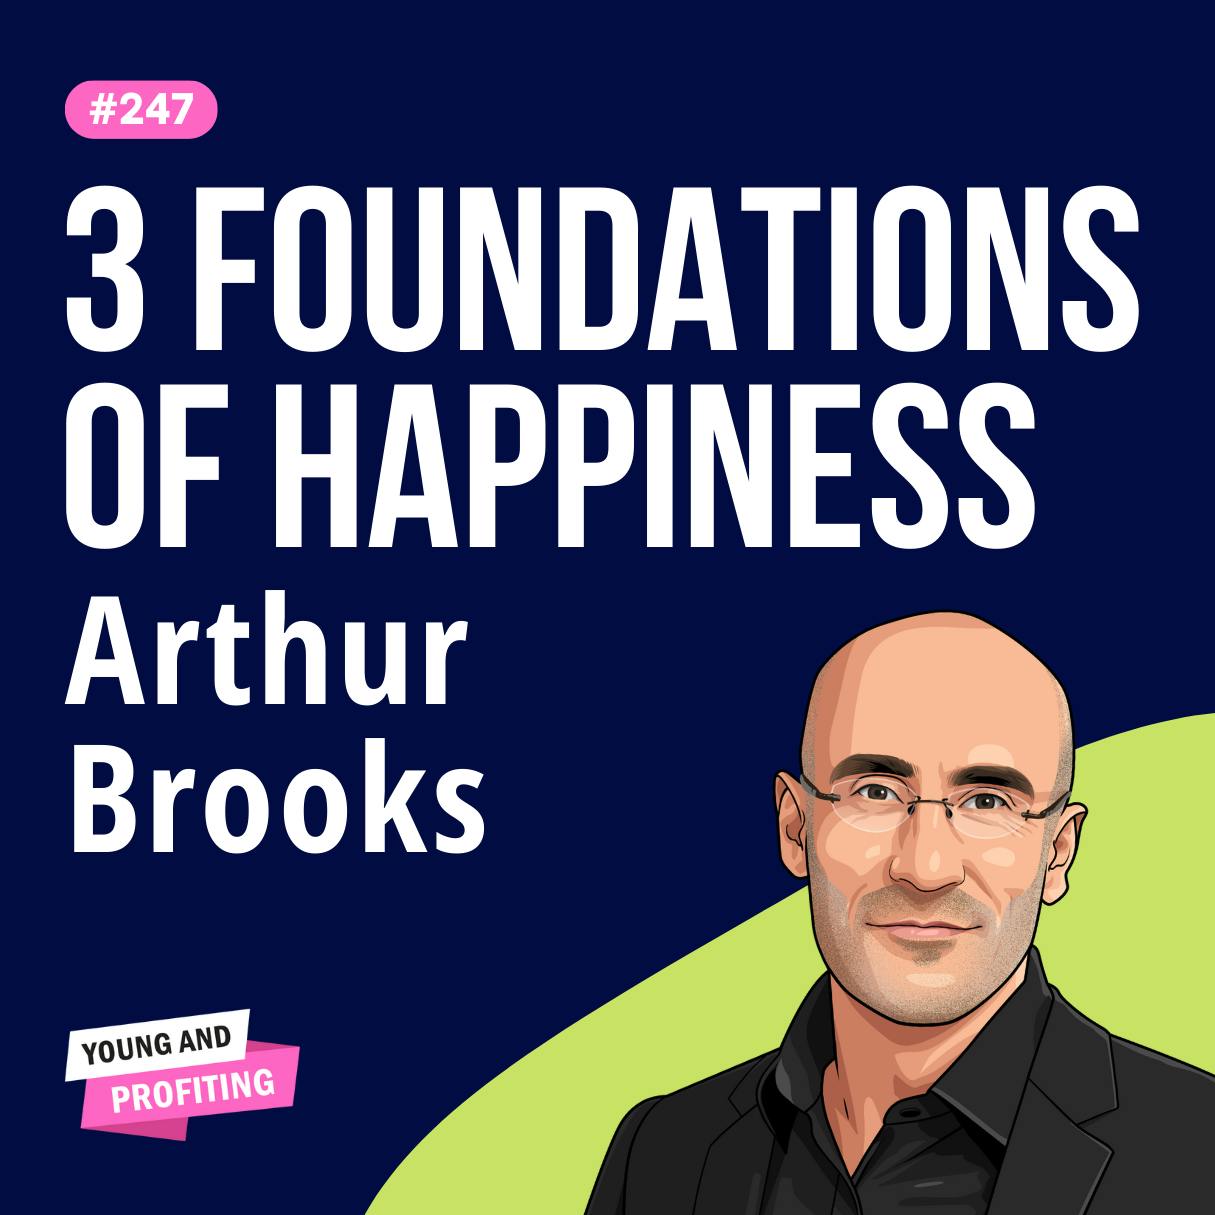 Arthur Brooks: The Science of Happiness, How to Build the Life You Want | E247